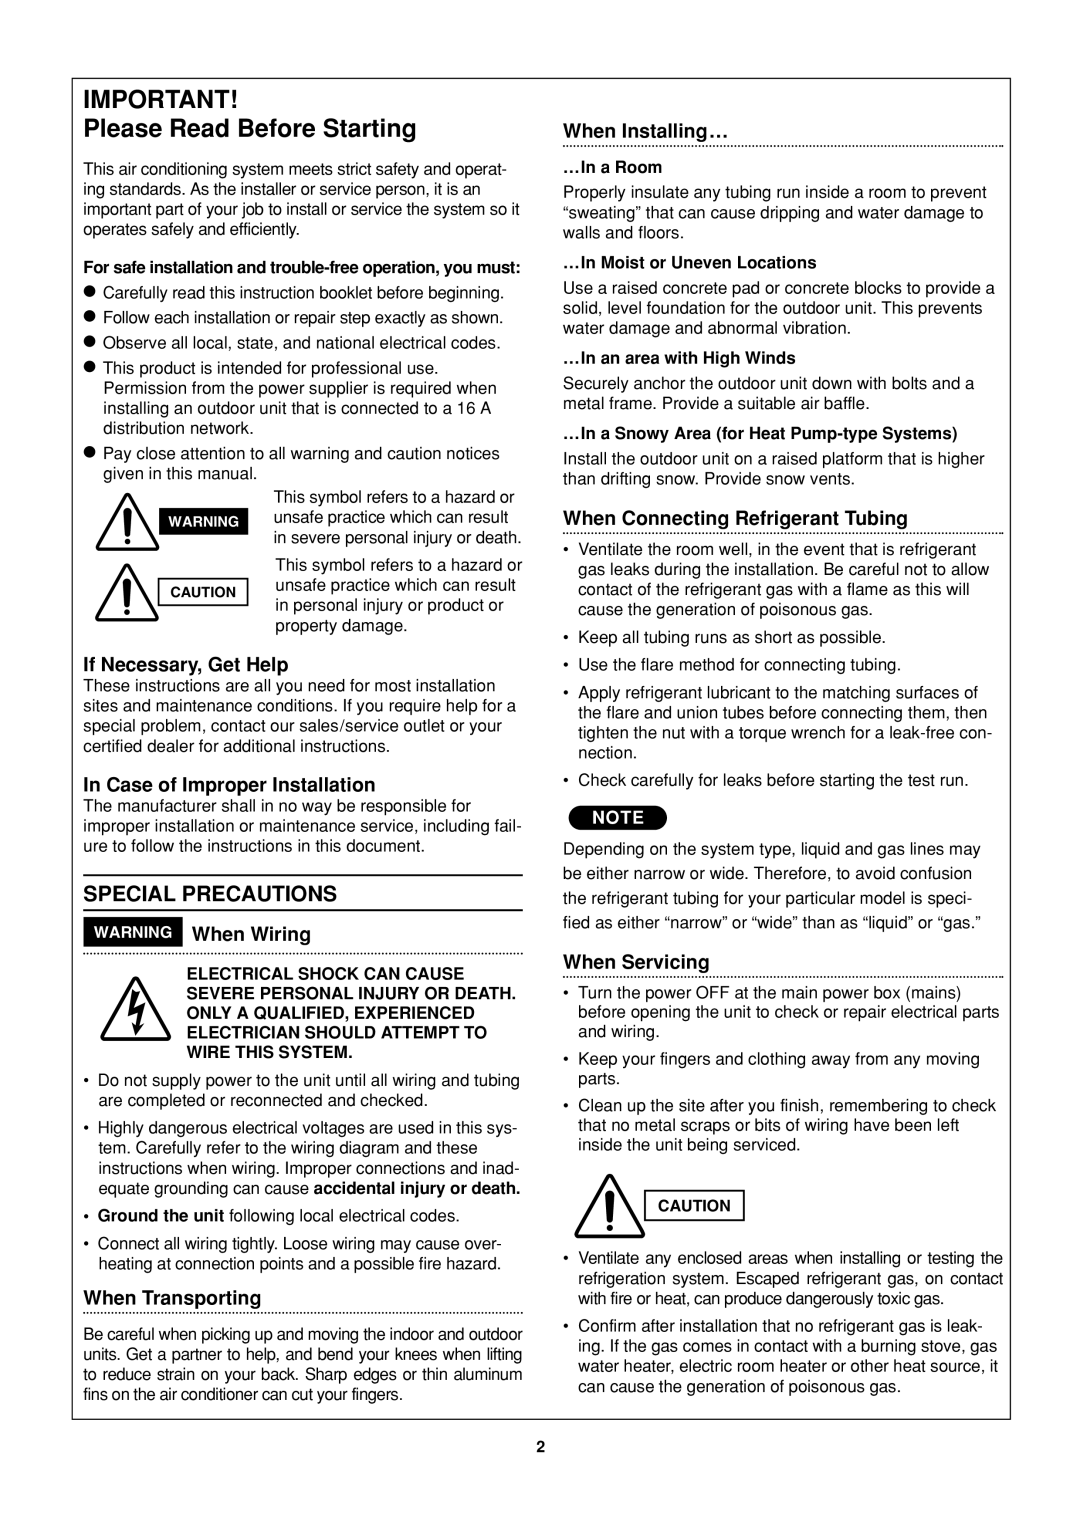 Sanyo SPW-UMR164EXH56, R410A Please Read Before Starting, Special Precautions, If Necessary, Get Help, WARNING When Wiring 